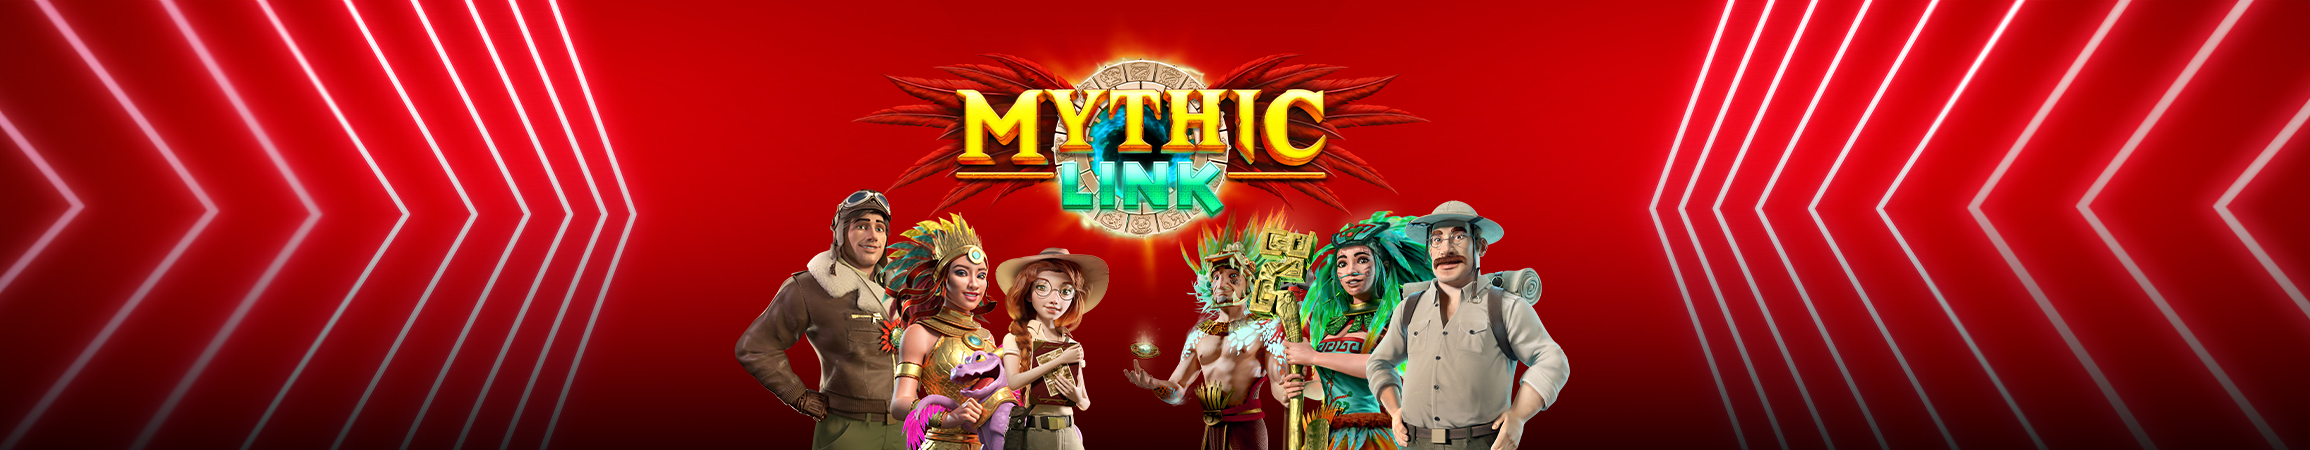 FBM® brings Mythic Link™ adventures to the United States